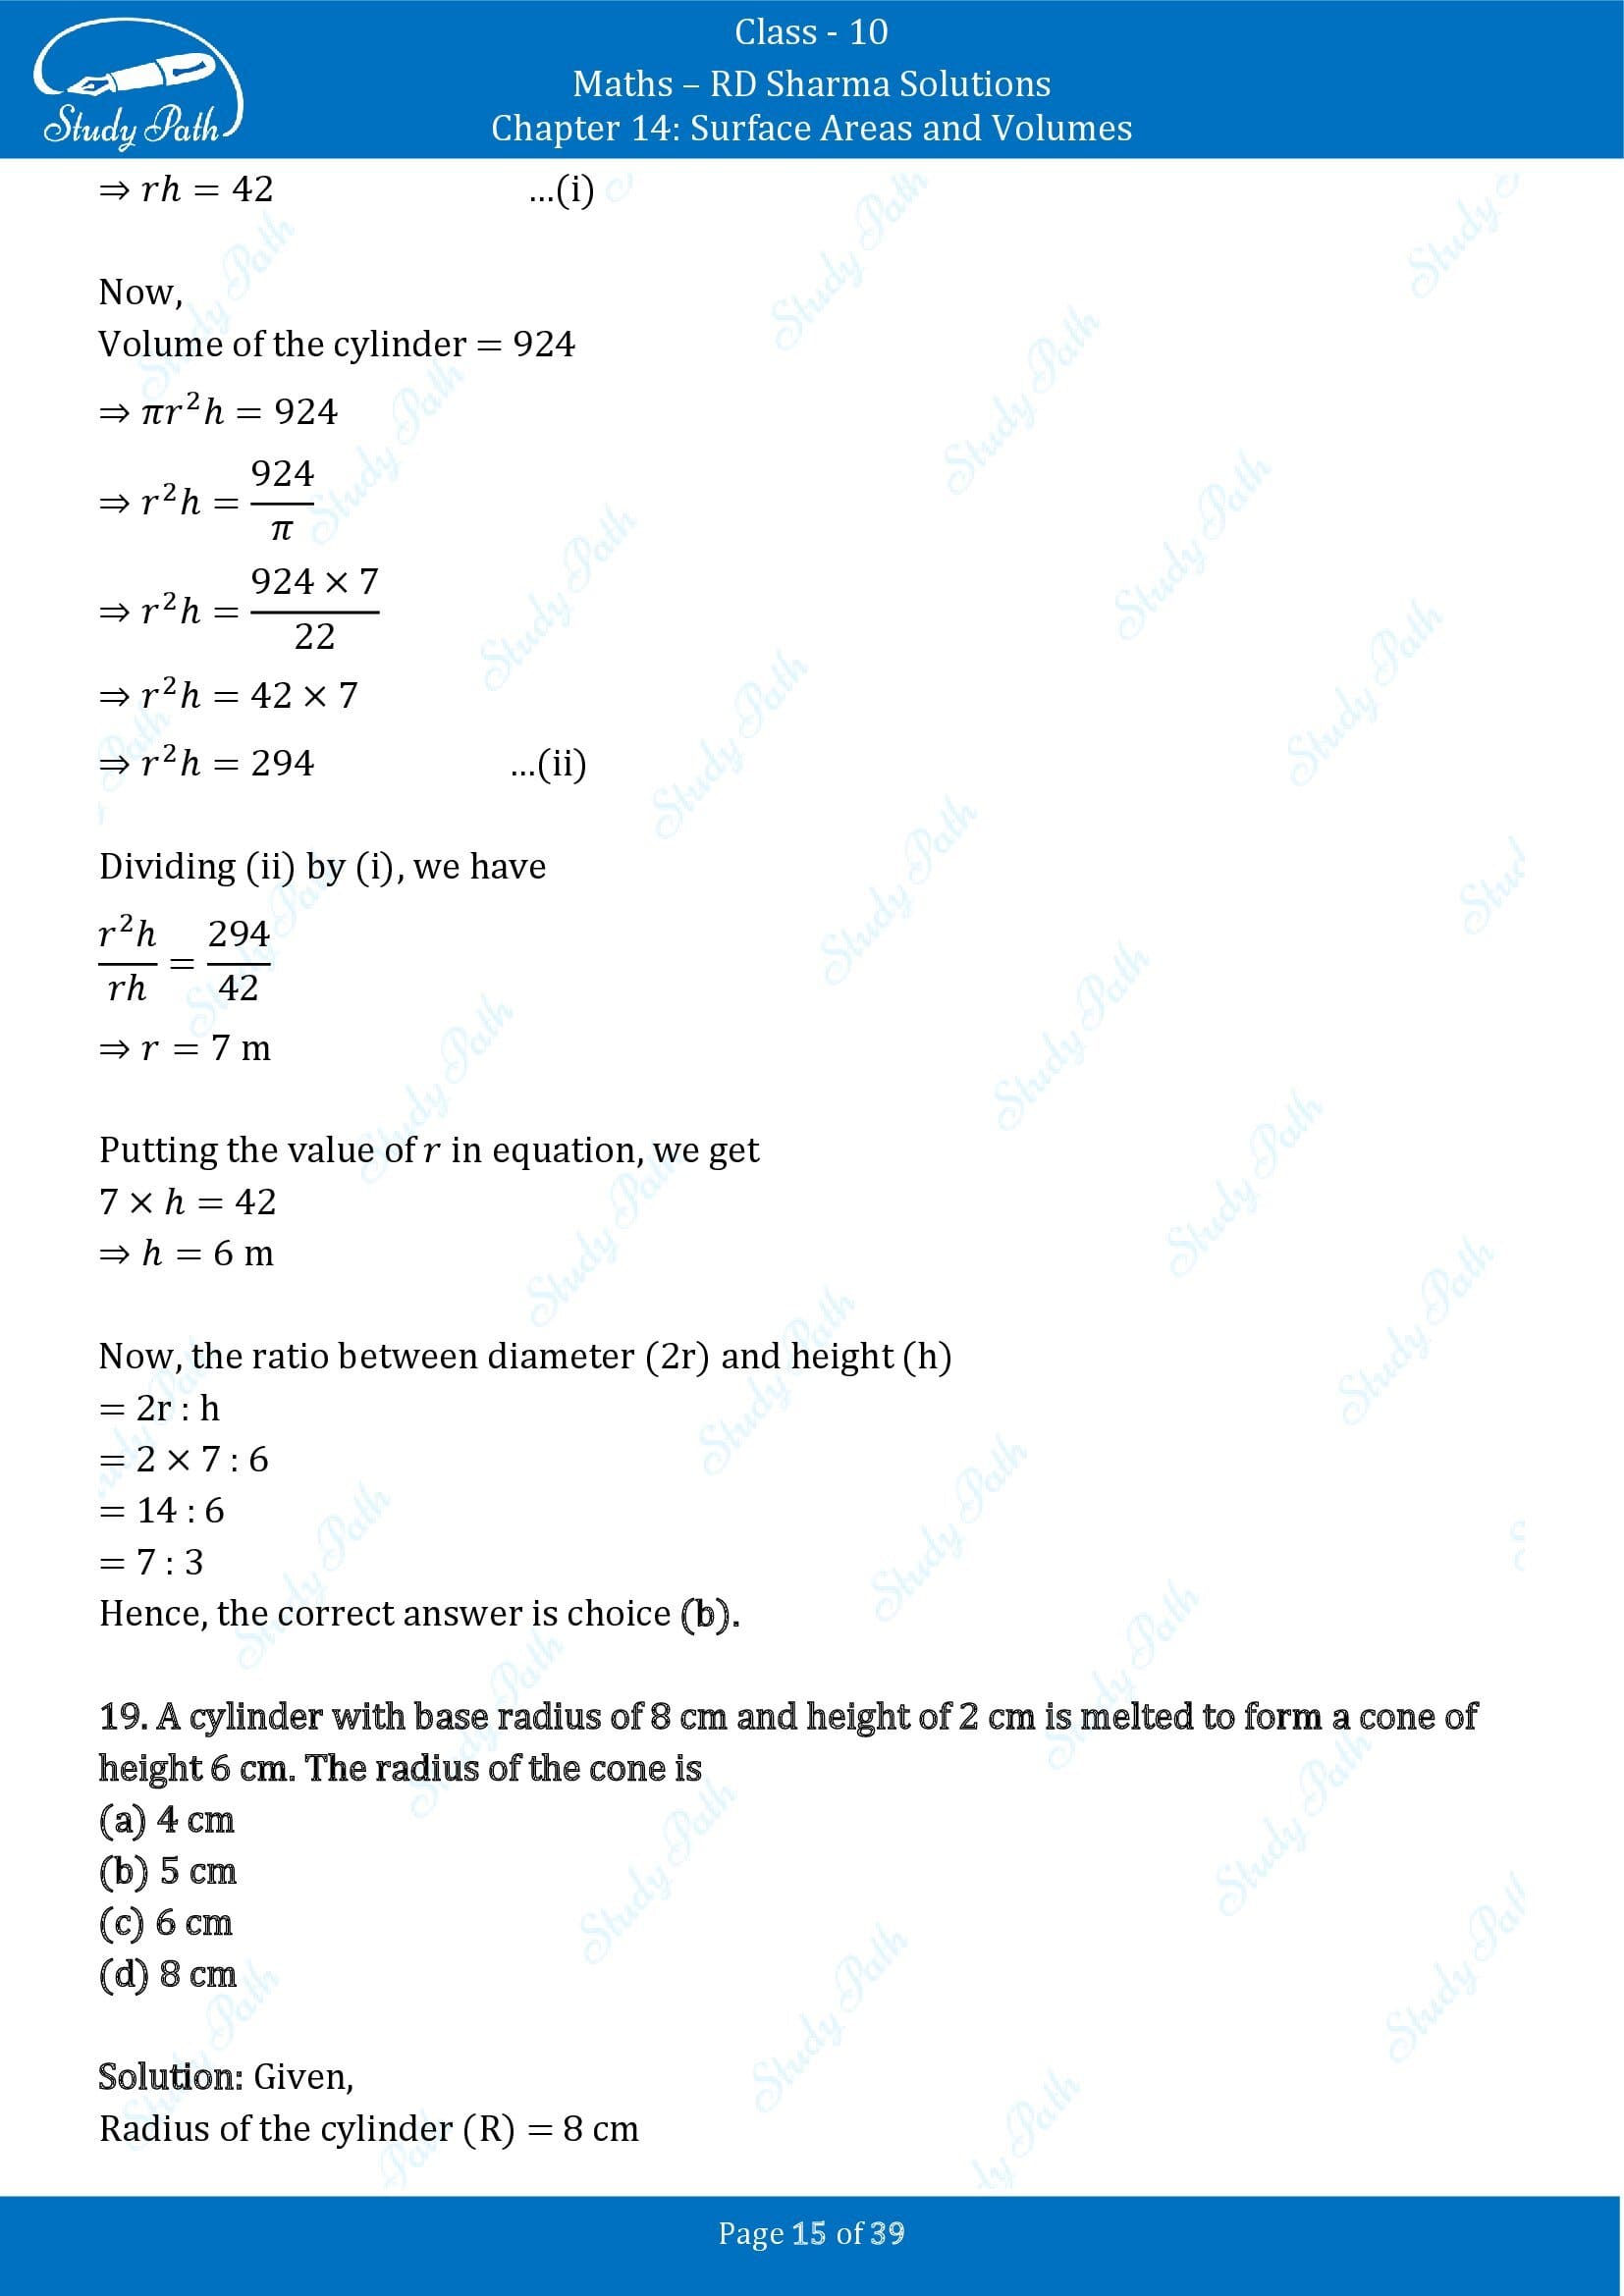 RD Sharma Solutions Class 10 Chapter 14 Surface Areas and Volumes Multiple Choice Question MCQs 00015